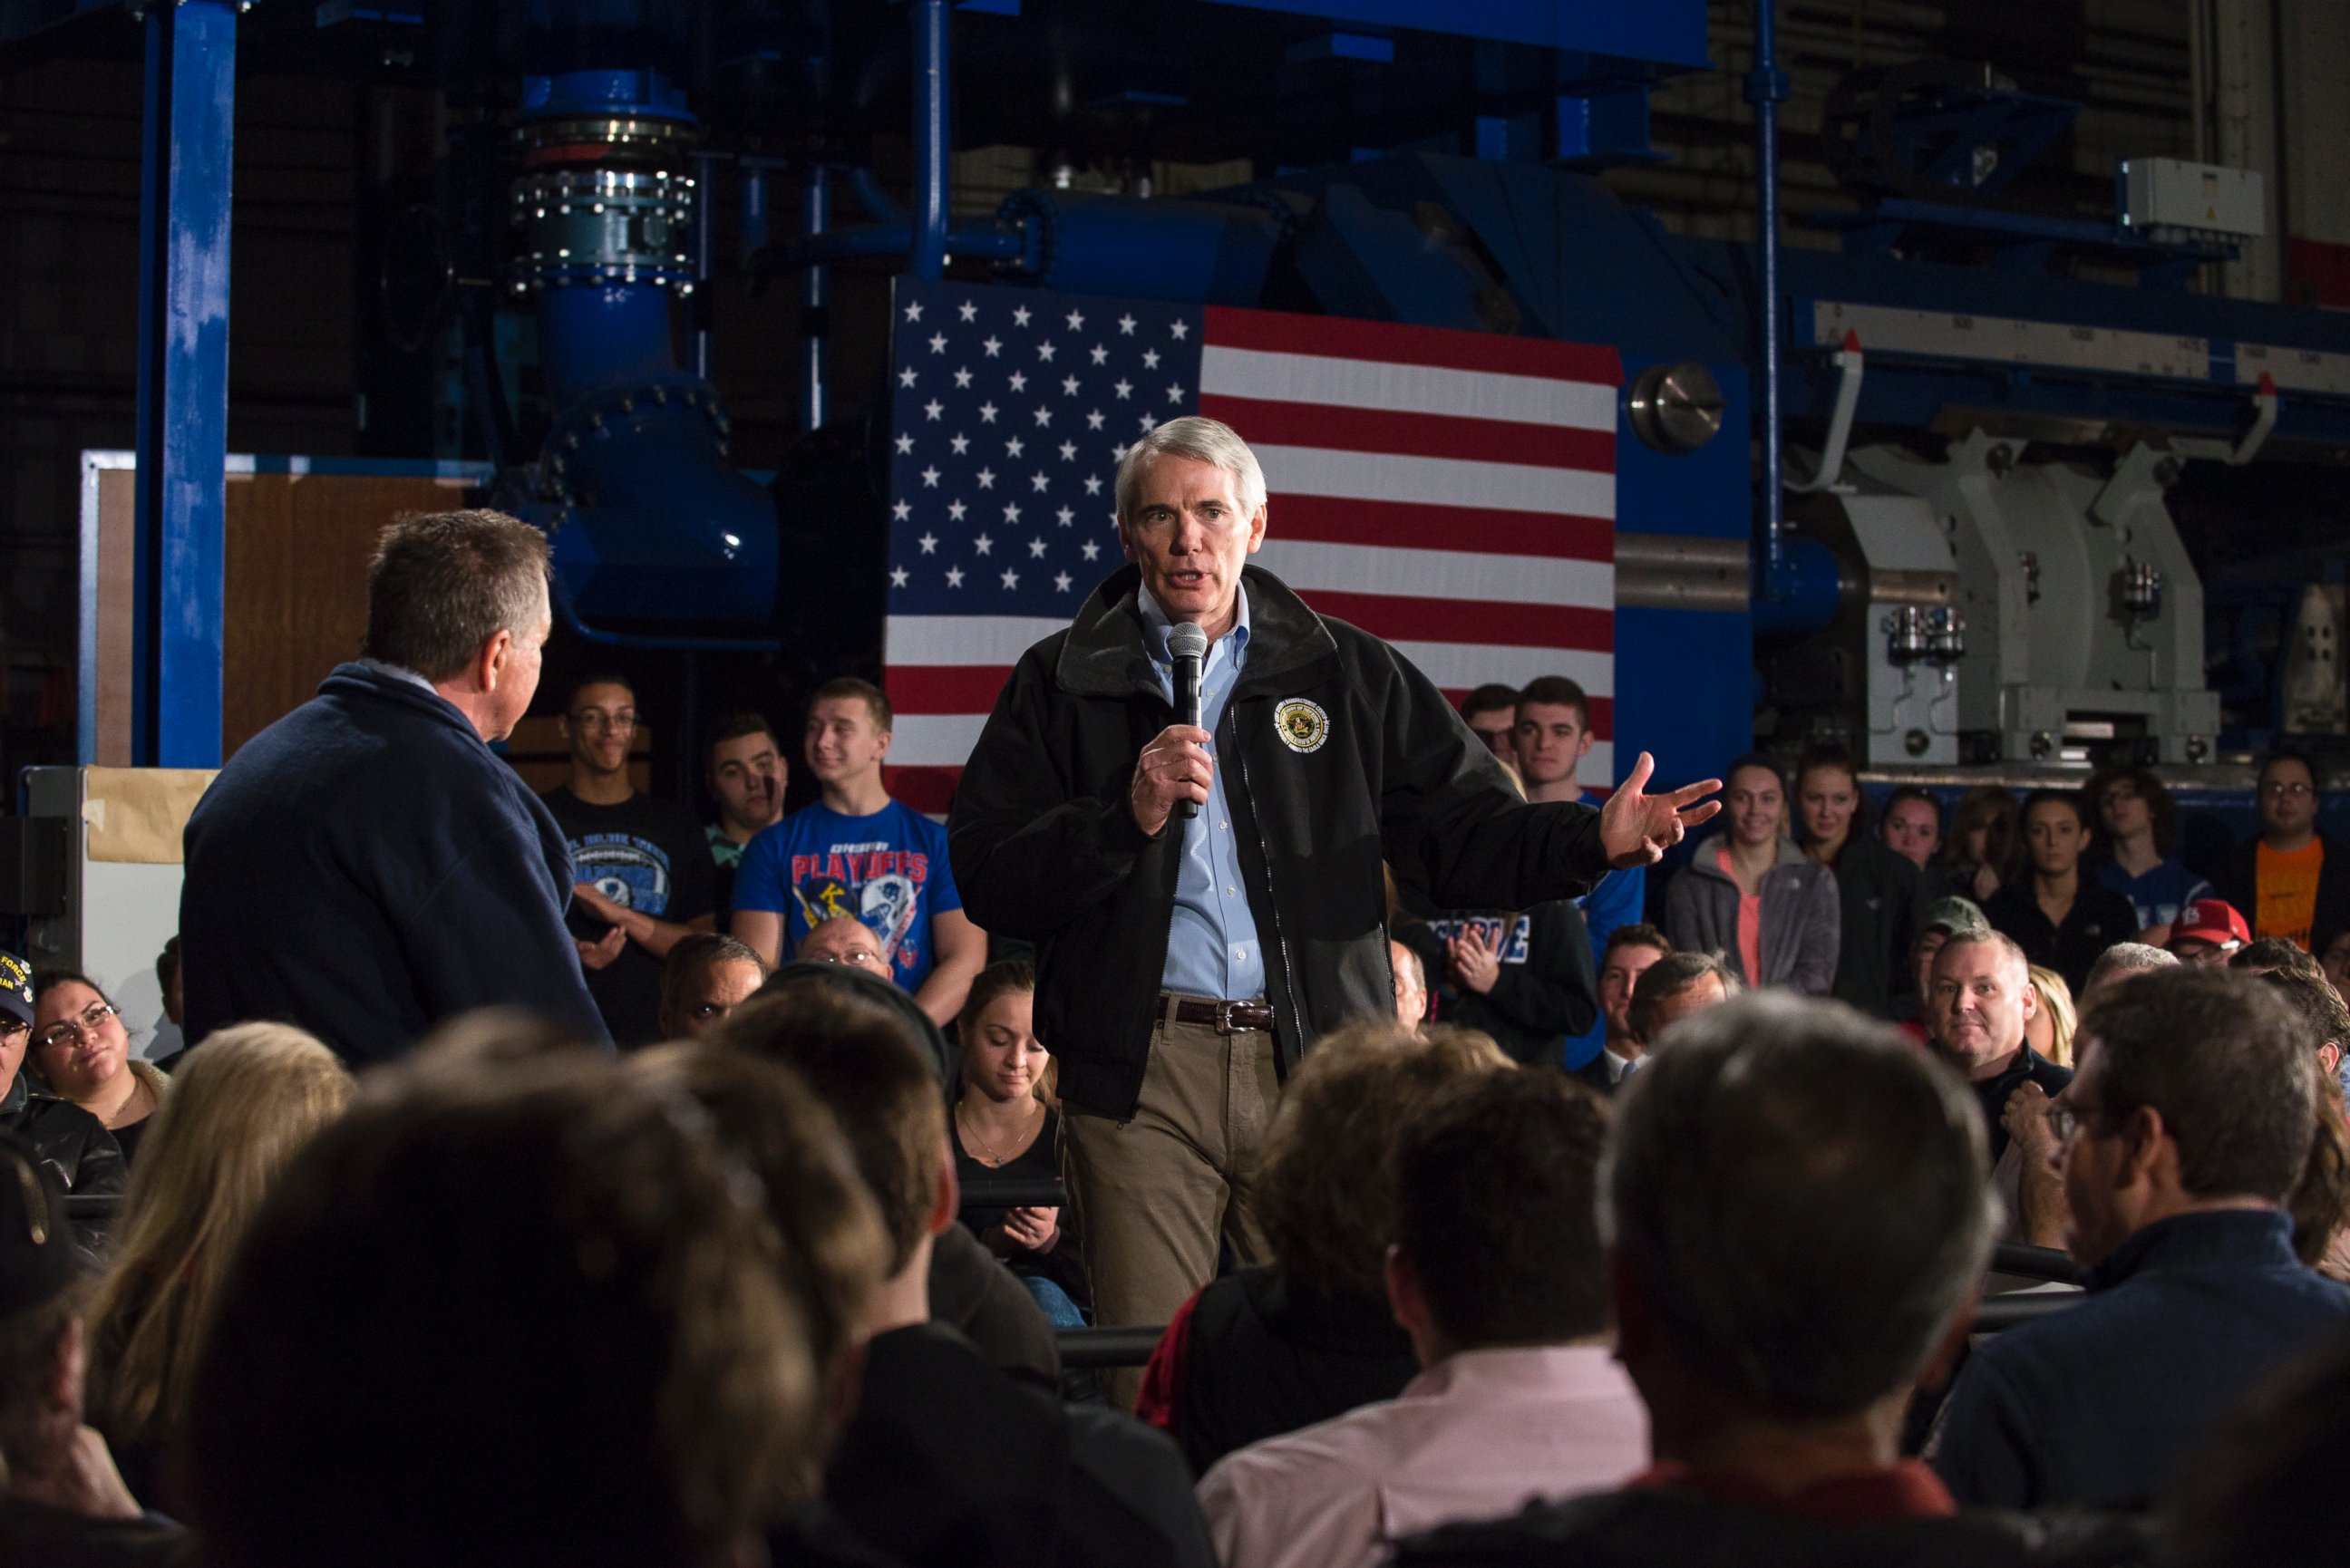 PHOTO: Ohio Senator Rob Portman speaks ahead of Republican presidential candidate Ohio Gov. John Kasich to supporters at a town hall meeting at Brilex Industries, Inc. on March 14, 2016, in Youngstown, Ohio. 